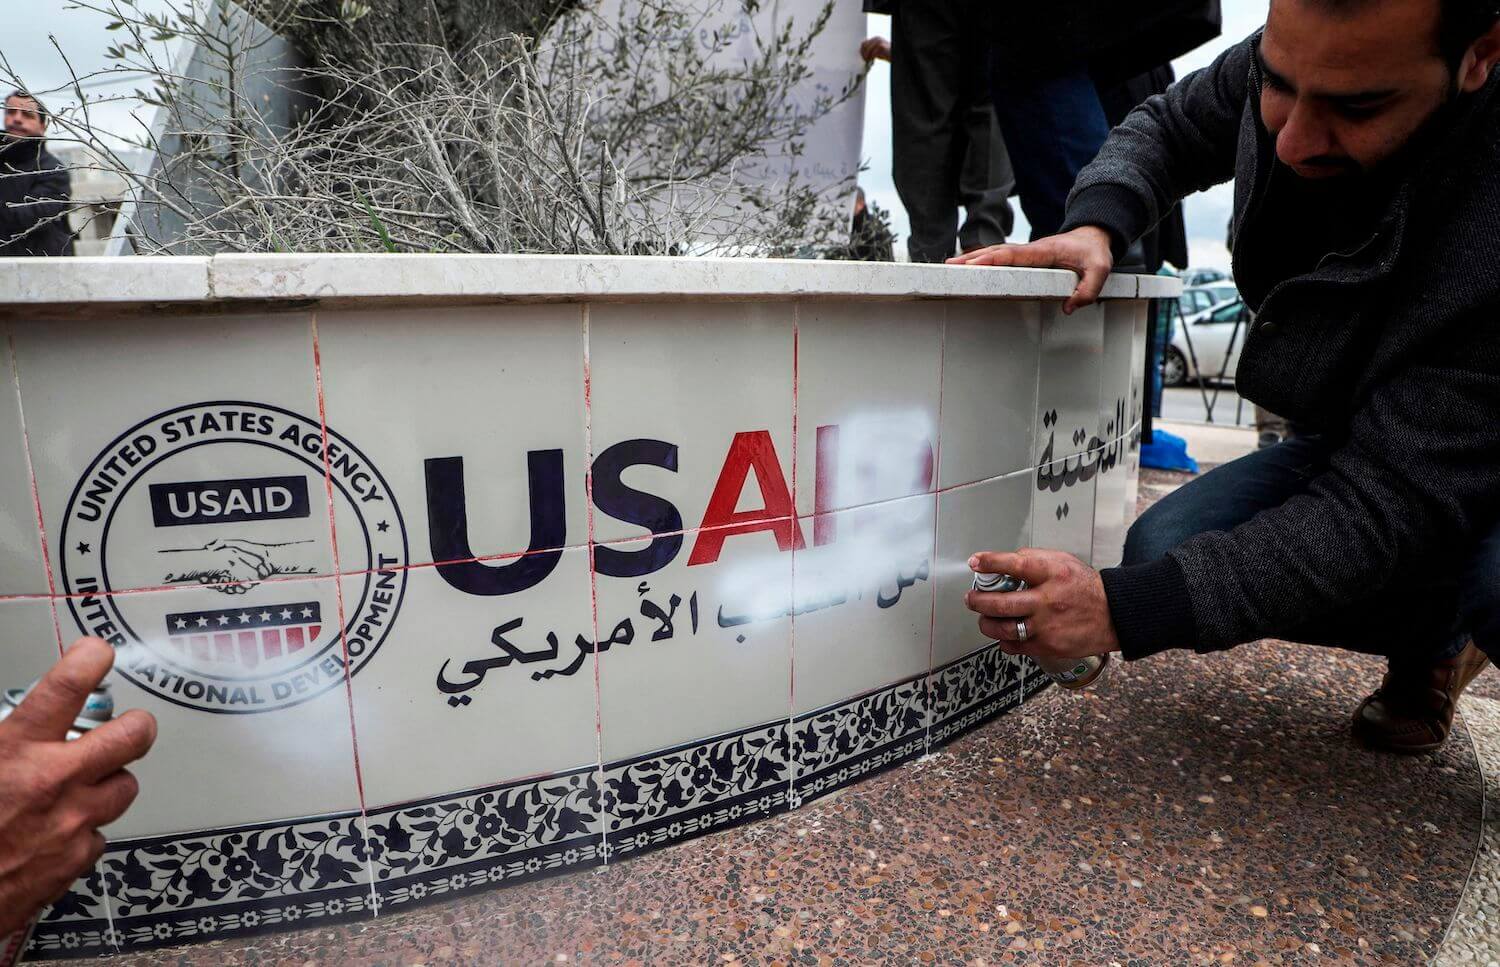 Palestinian protesters spray paint to cover the logo of the United States Agency for International Development (USAID), while protesting against US President Donald Trump's Middle East peace plan, in the city of Ramallah in the occupied West Bank on February 4, 2020. (Photo by ABBAS MOMANI / AFP) (Photo by ABBAS MOMANI/AFP via Getty Images)